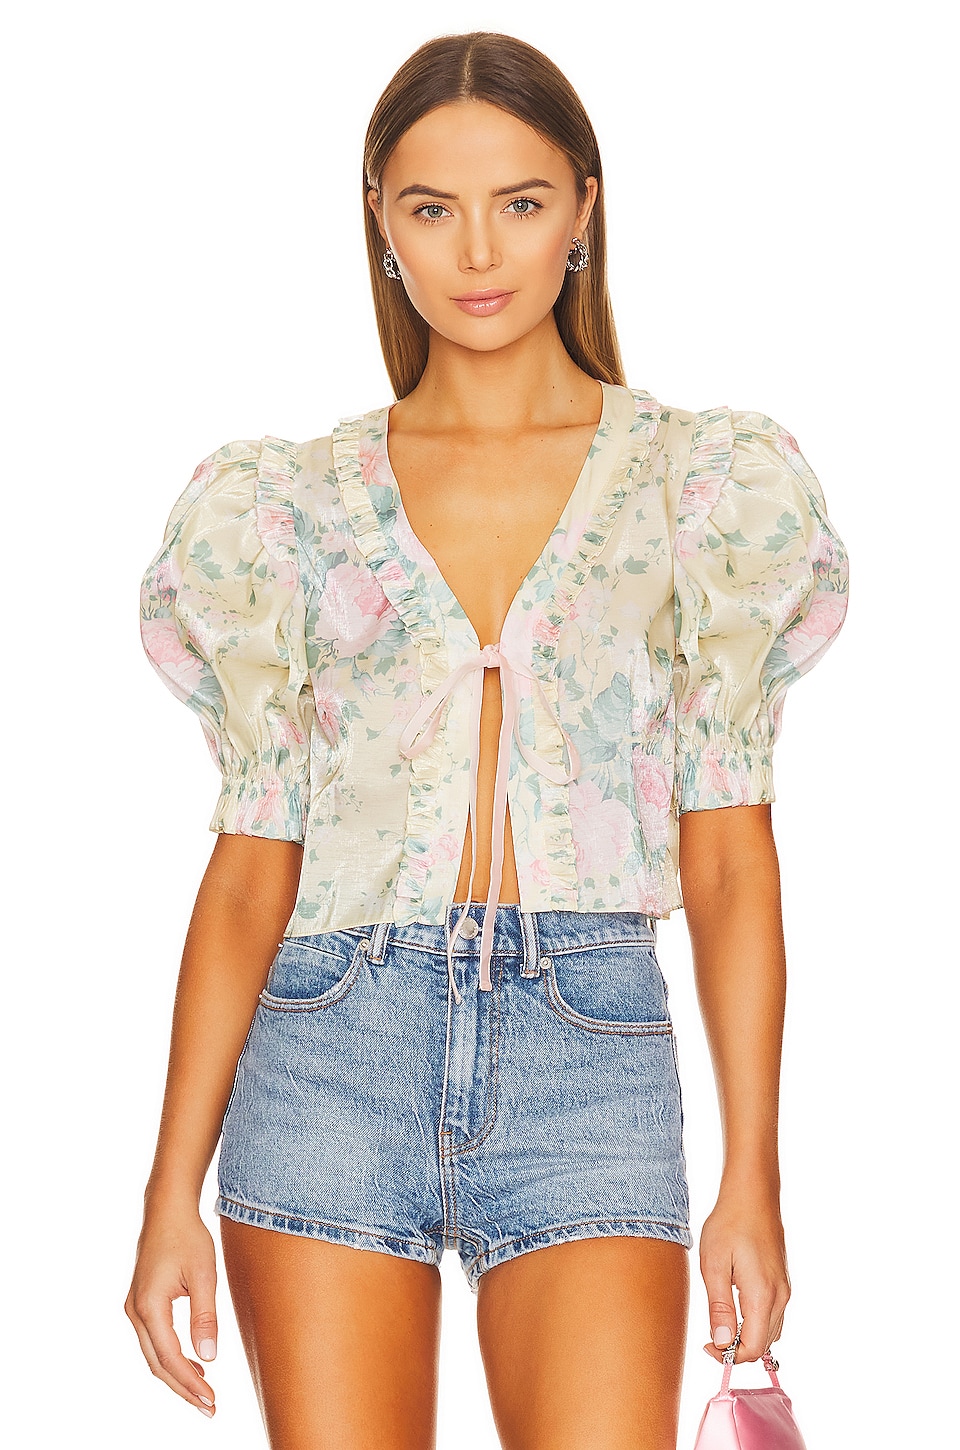 Selkie The Paper Doll Blouse in Fantasy | REVOLVE